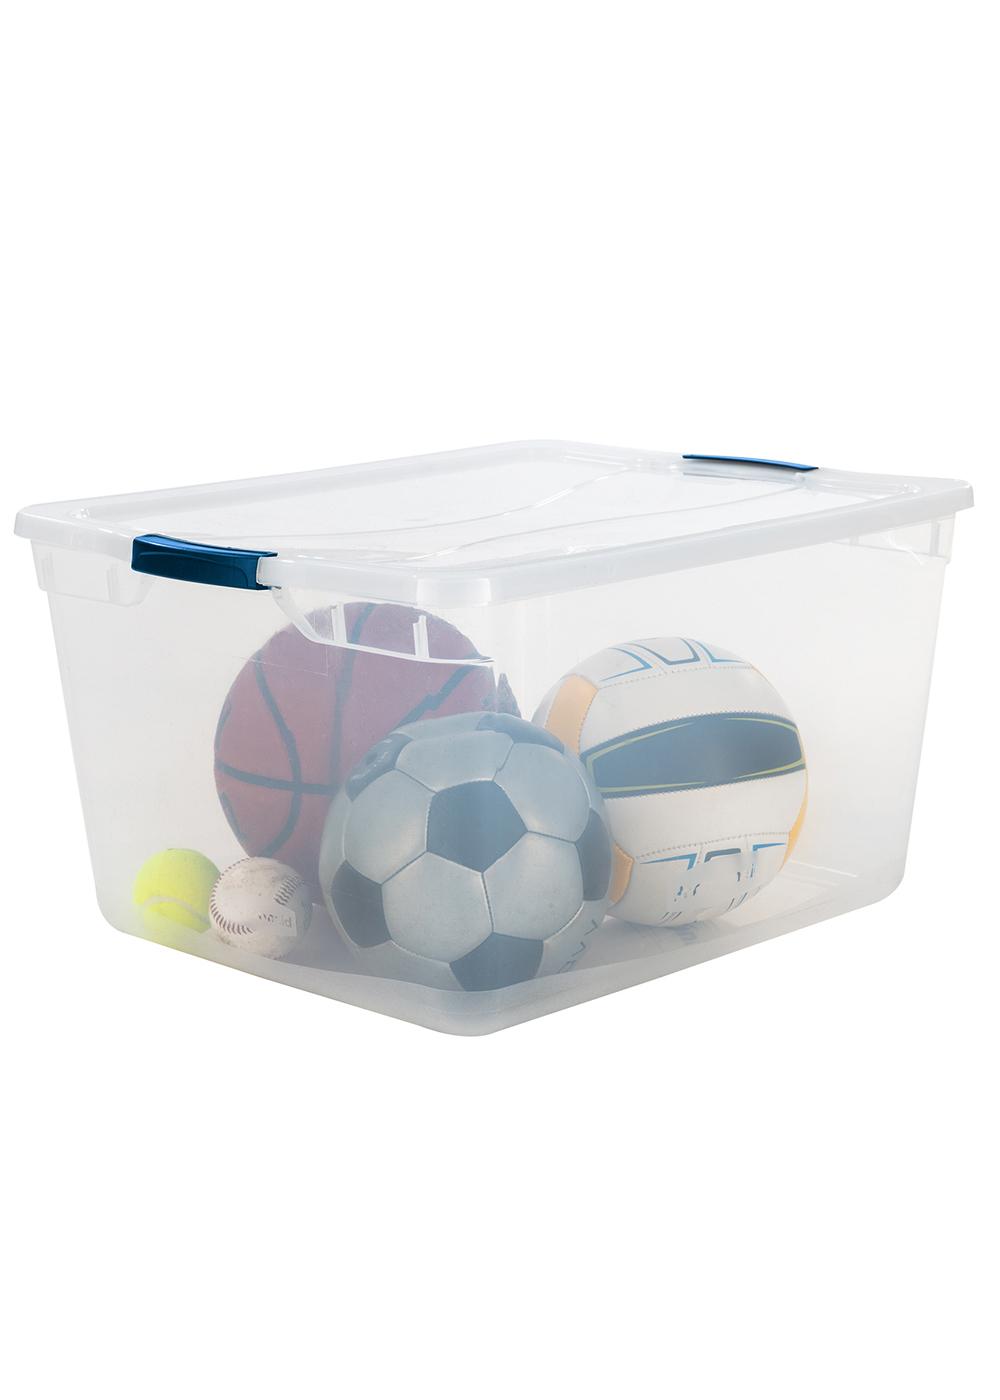 Rubbermaid Cleverstore Clear Latching Tote - Shop Storage Bins at